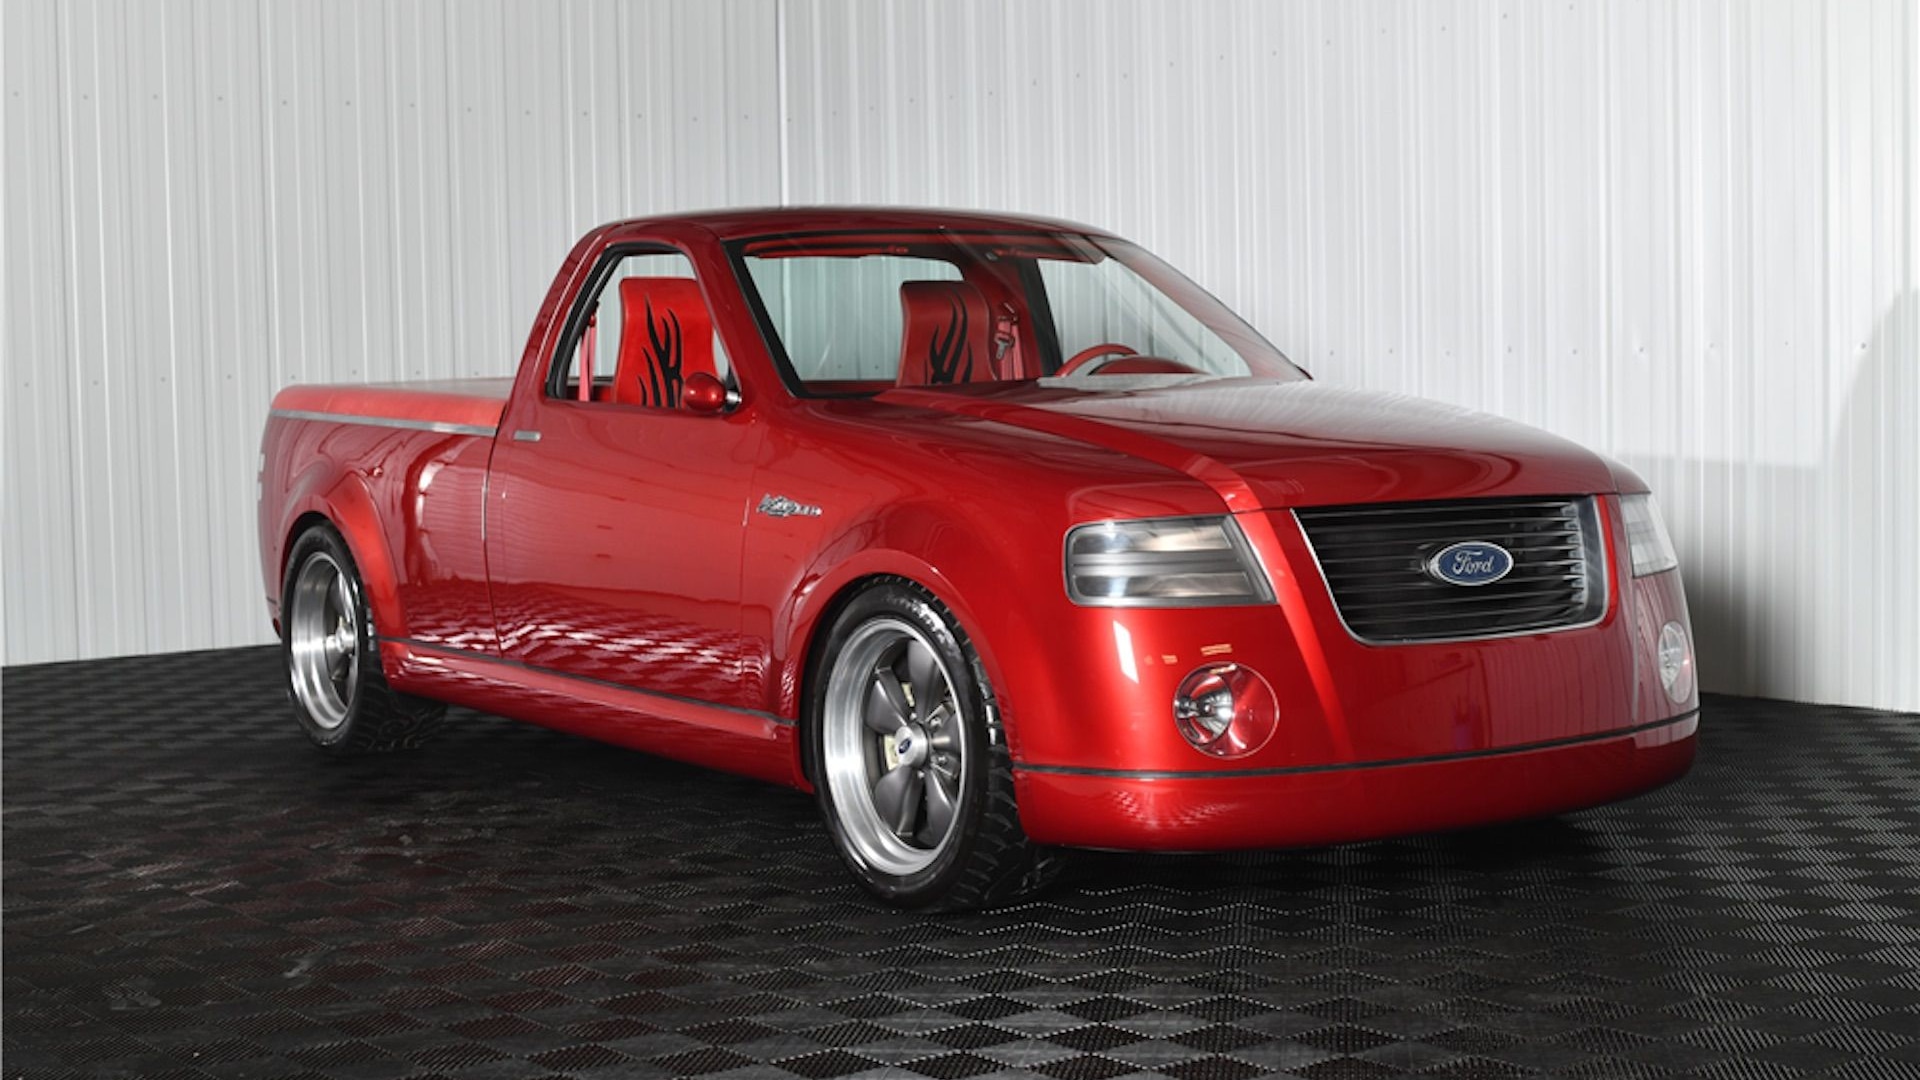 10 Ford F-10 Lightning Rod concept has gone home